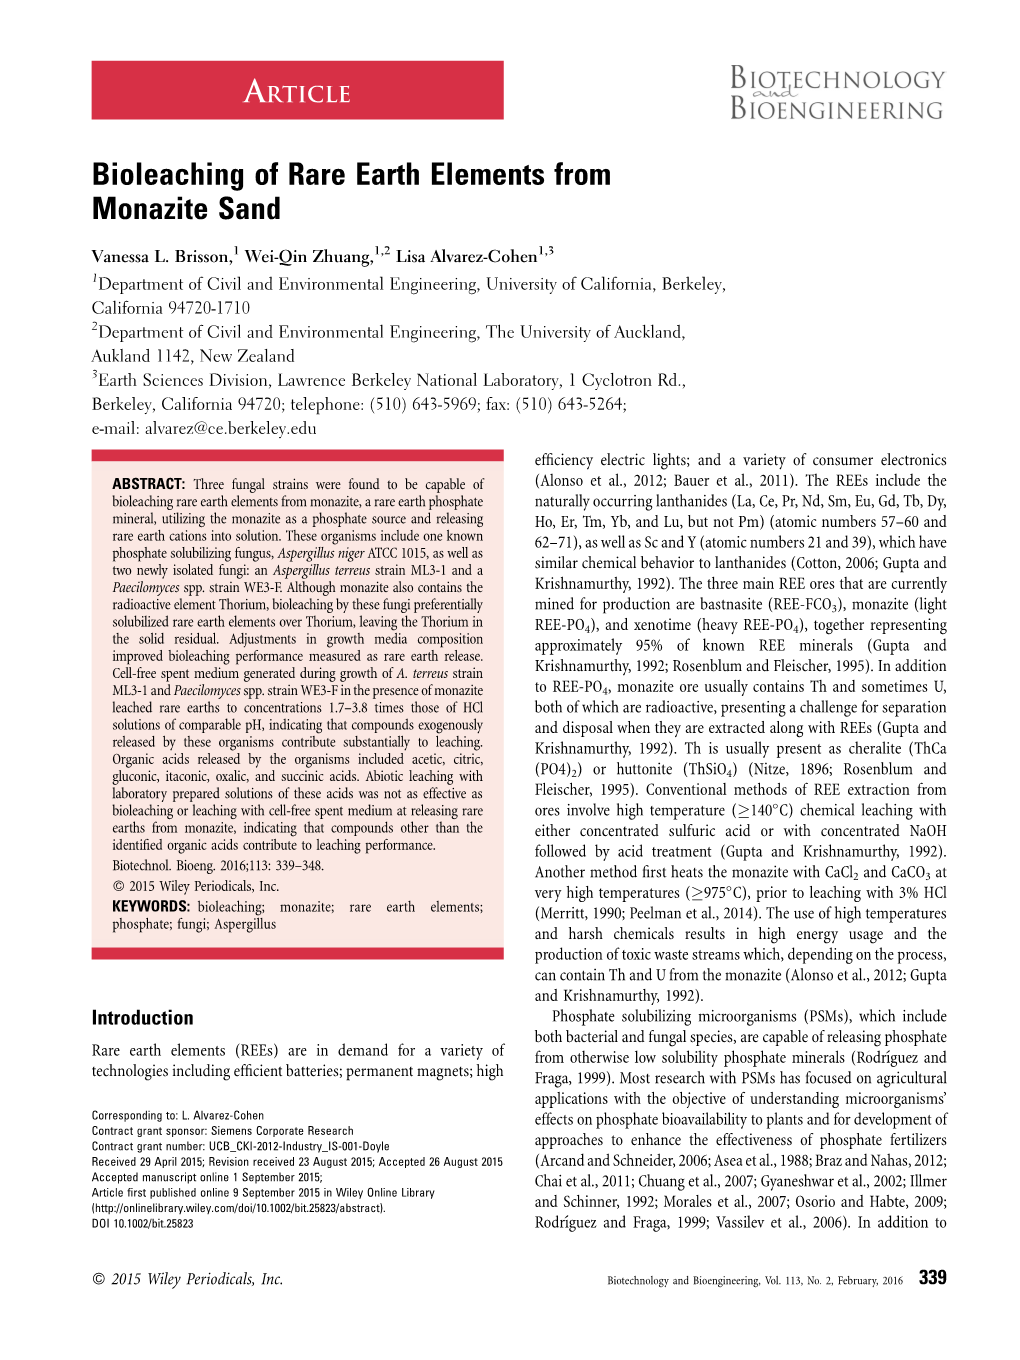 Bioleaching of Rare Earth Elements from Monazite Sand